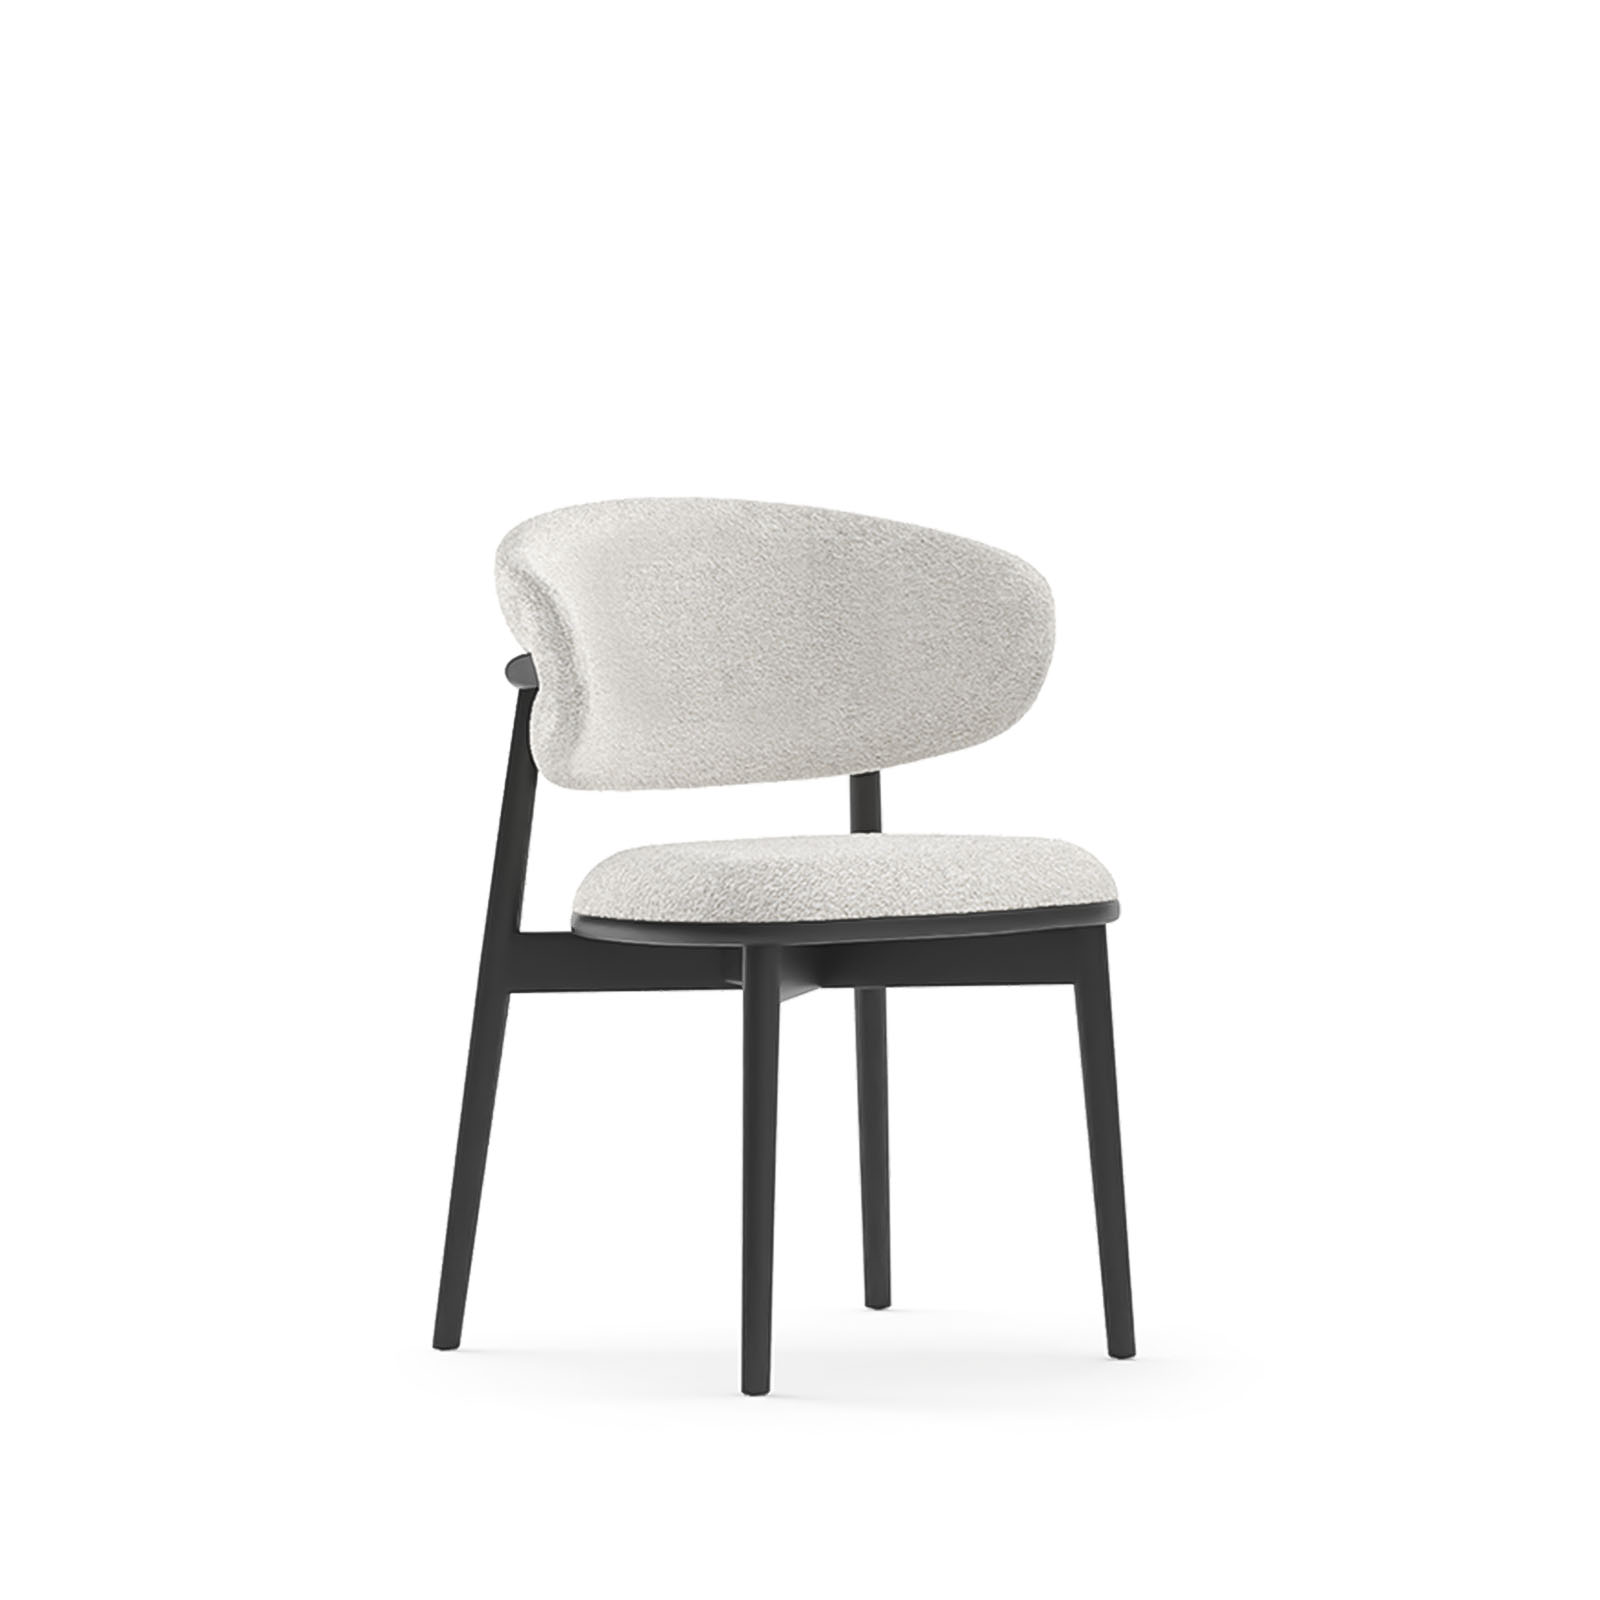 Barcelona Dining Chair - White Background angle View - white fabric black legs